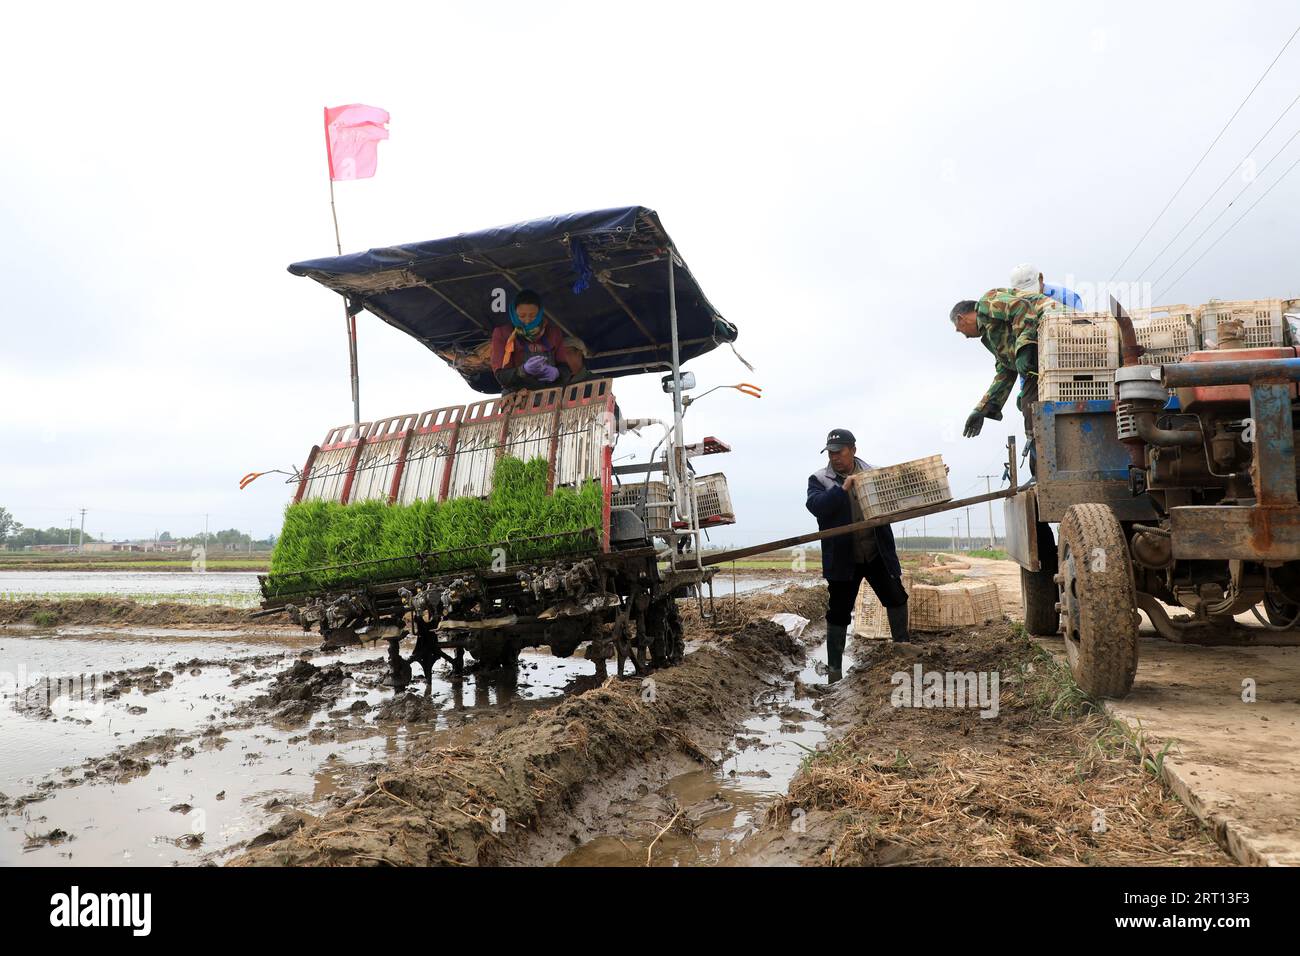 LUANNAN COUNTY, Hebei Province, China - May 15, 2020: Farmers use rice transplanters to grow rice in paddy fields. Stock Photo